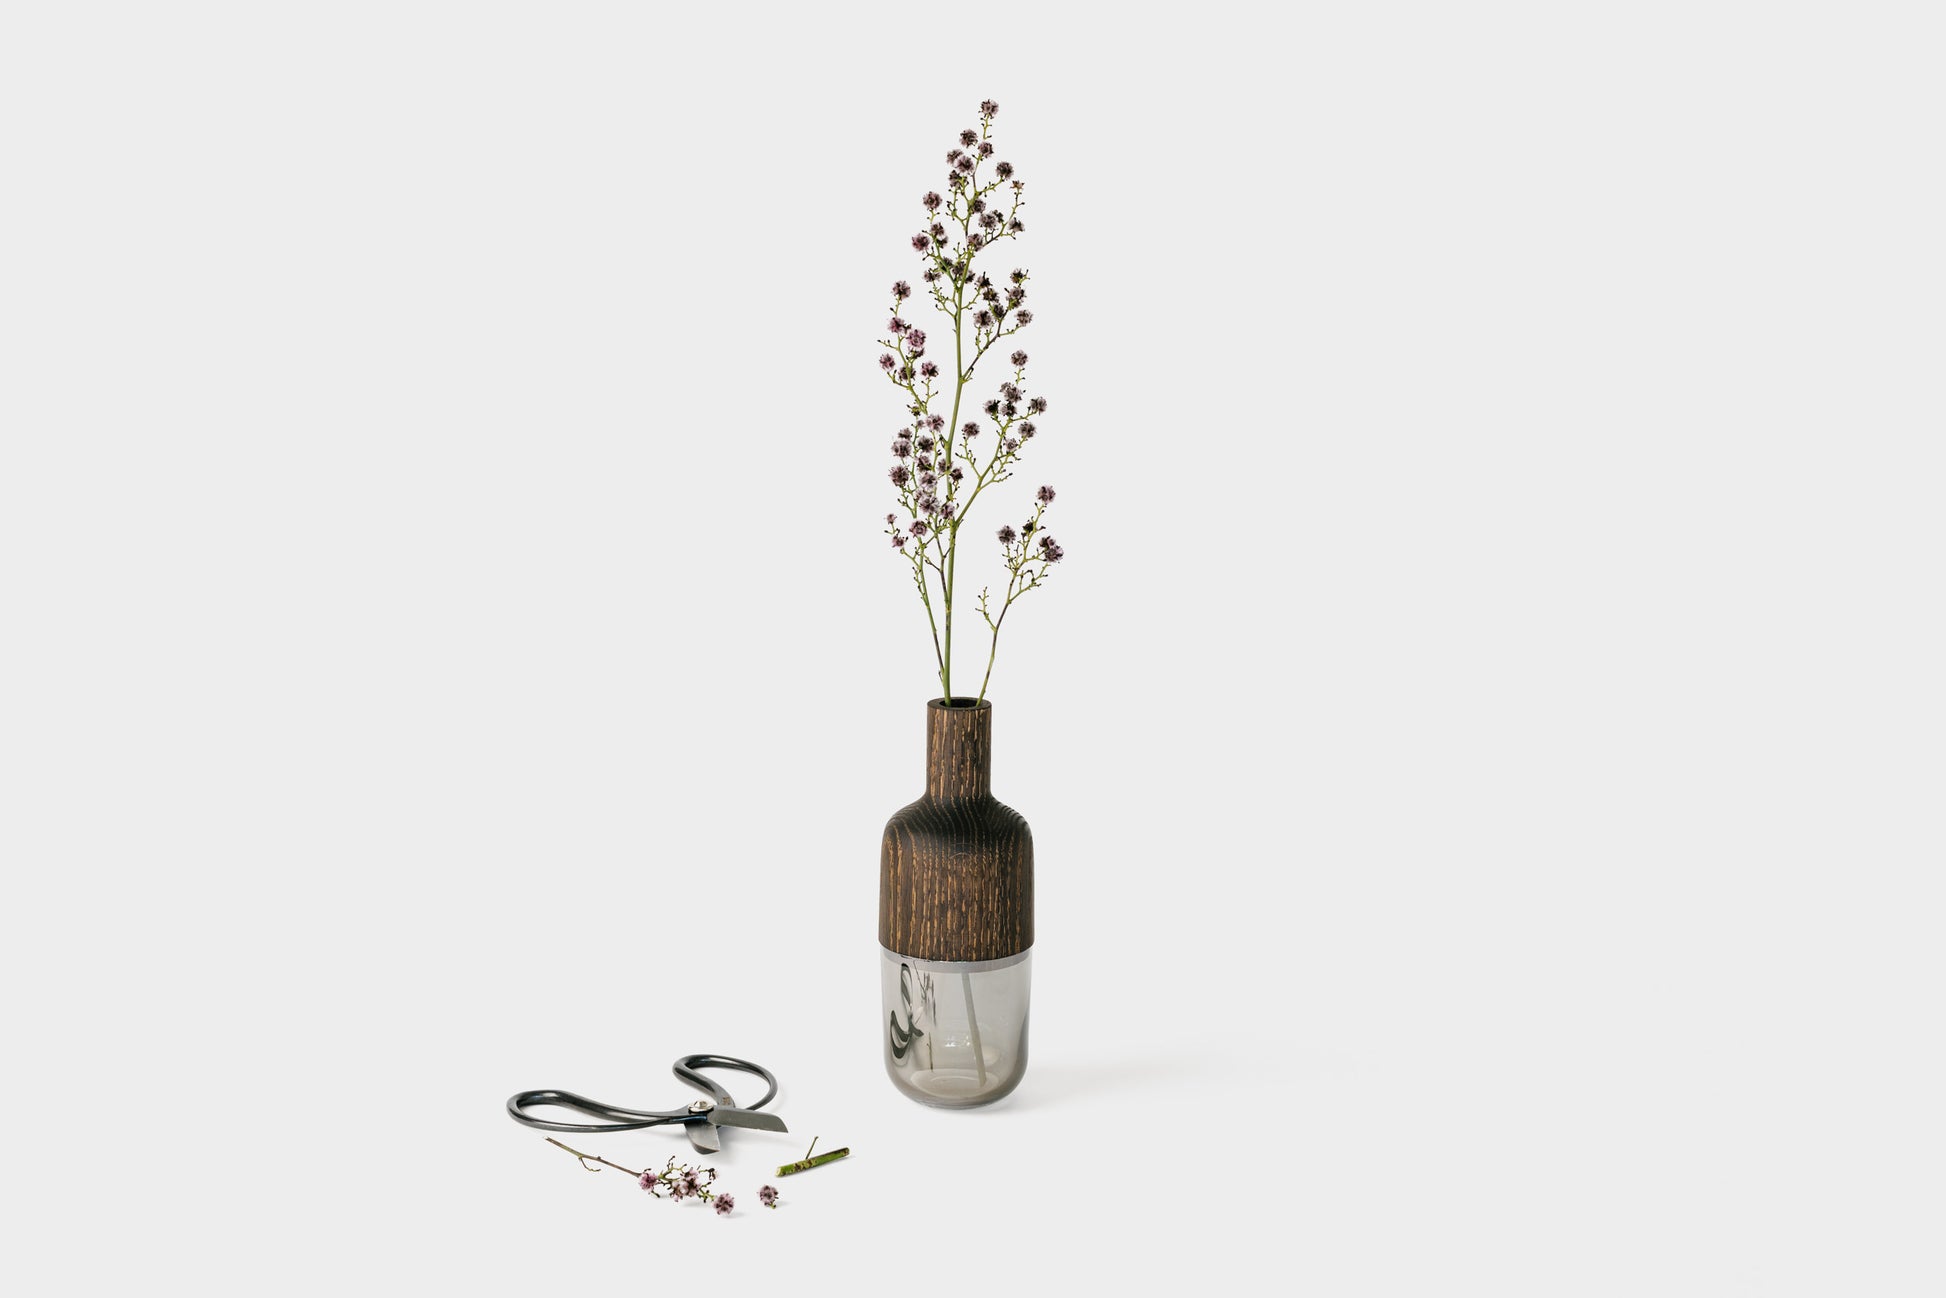 Japanese floral shears are shown with our Mae Marais Vase. Flowers in the vase with the cuttings next to the shears. Vase by Melanie Abrantes Designs.